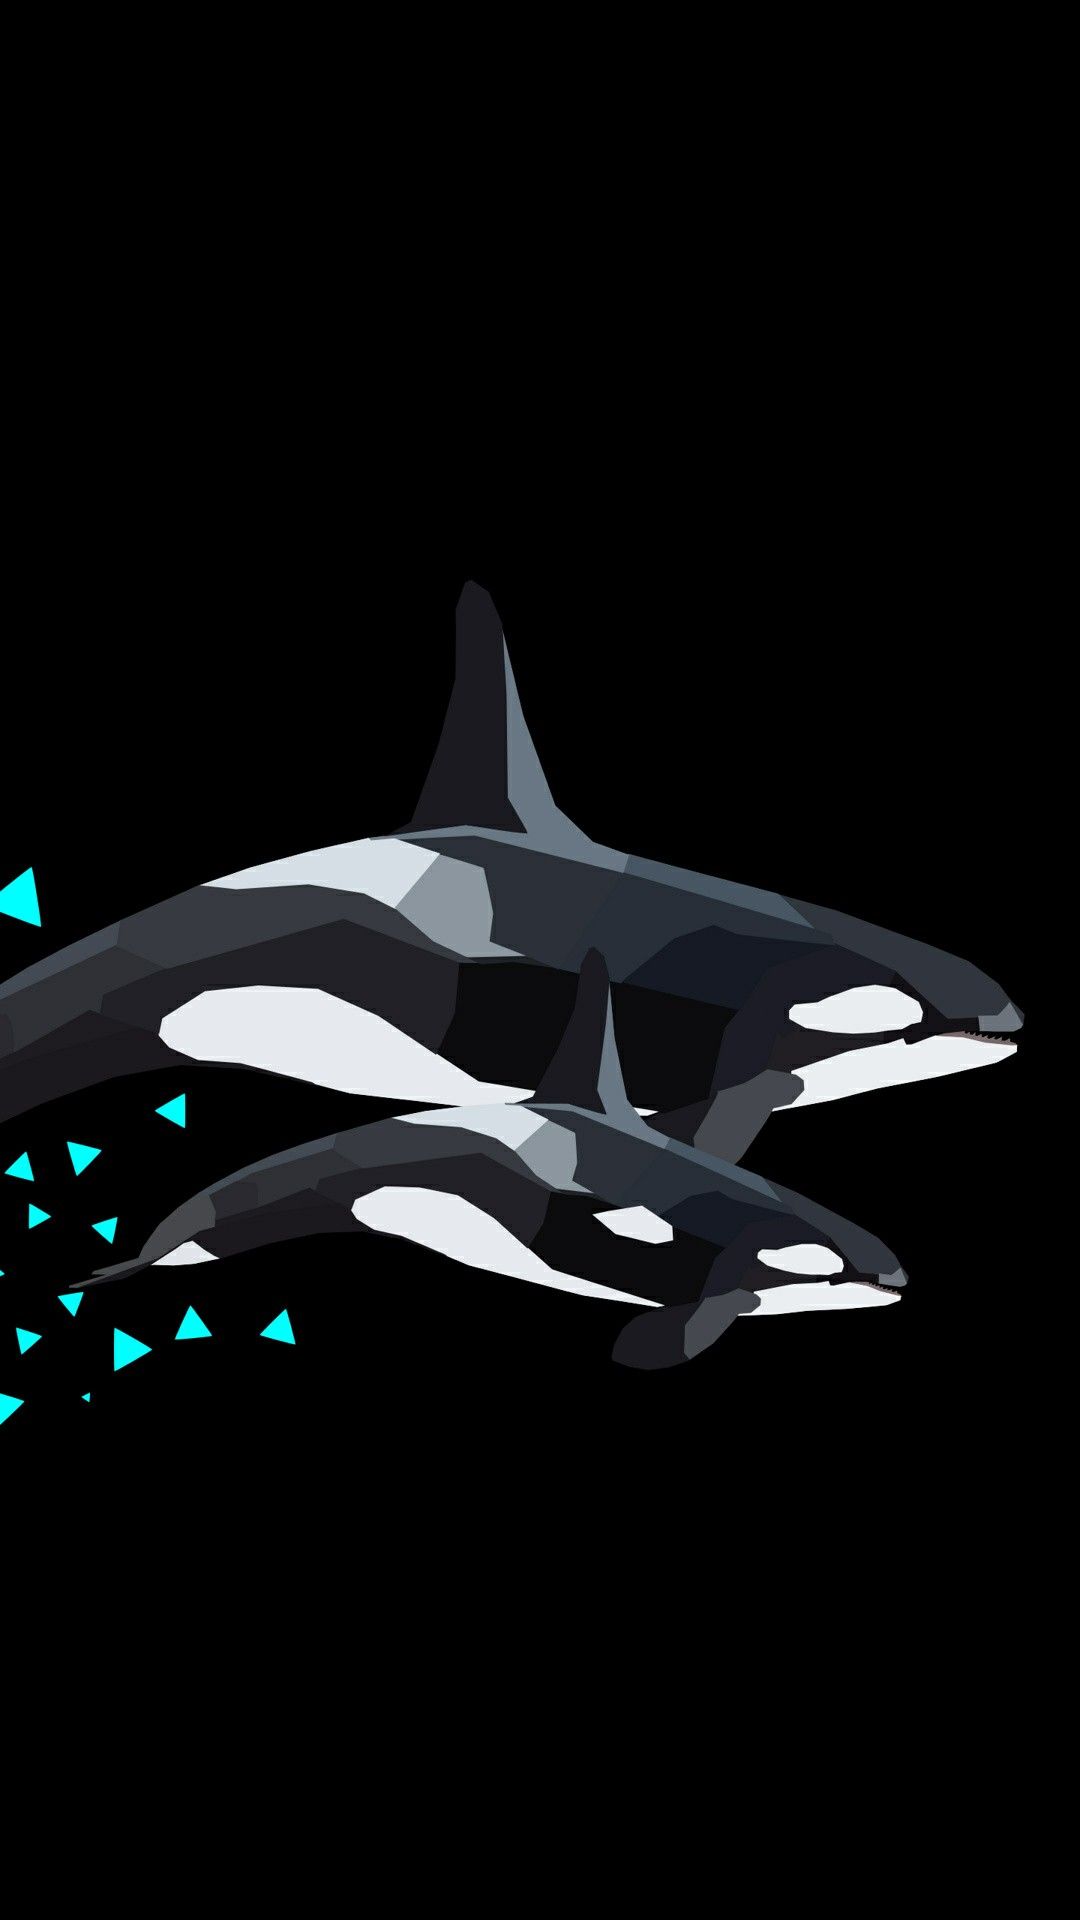 Orca Phone Wallpapers